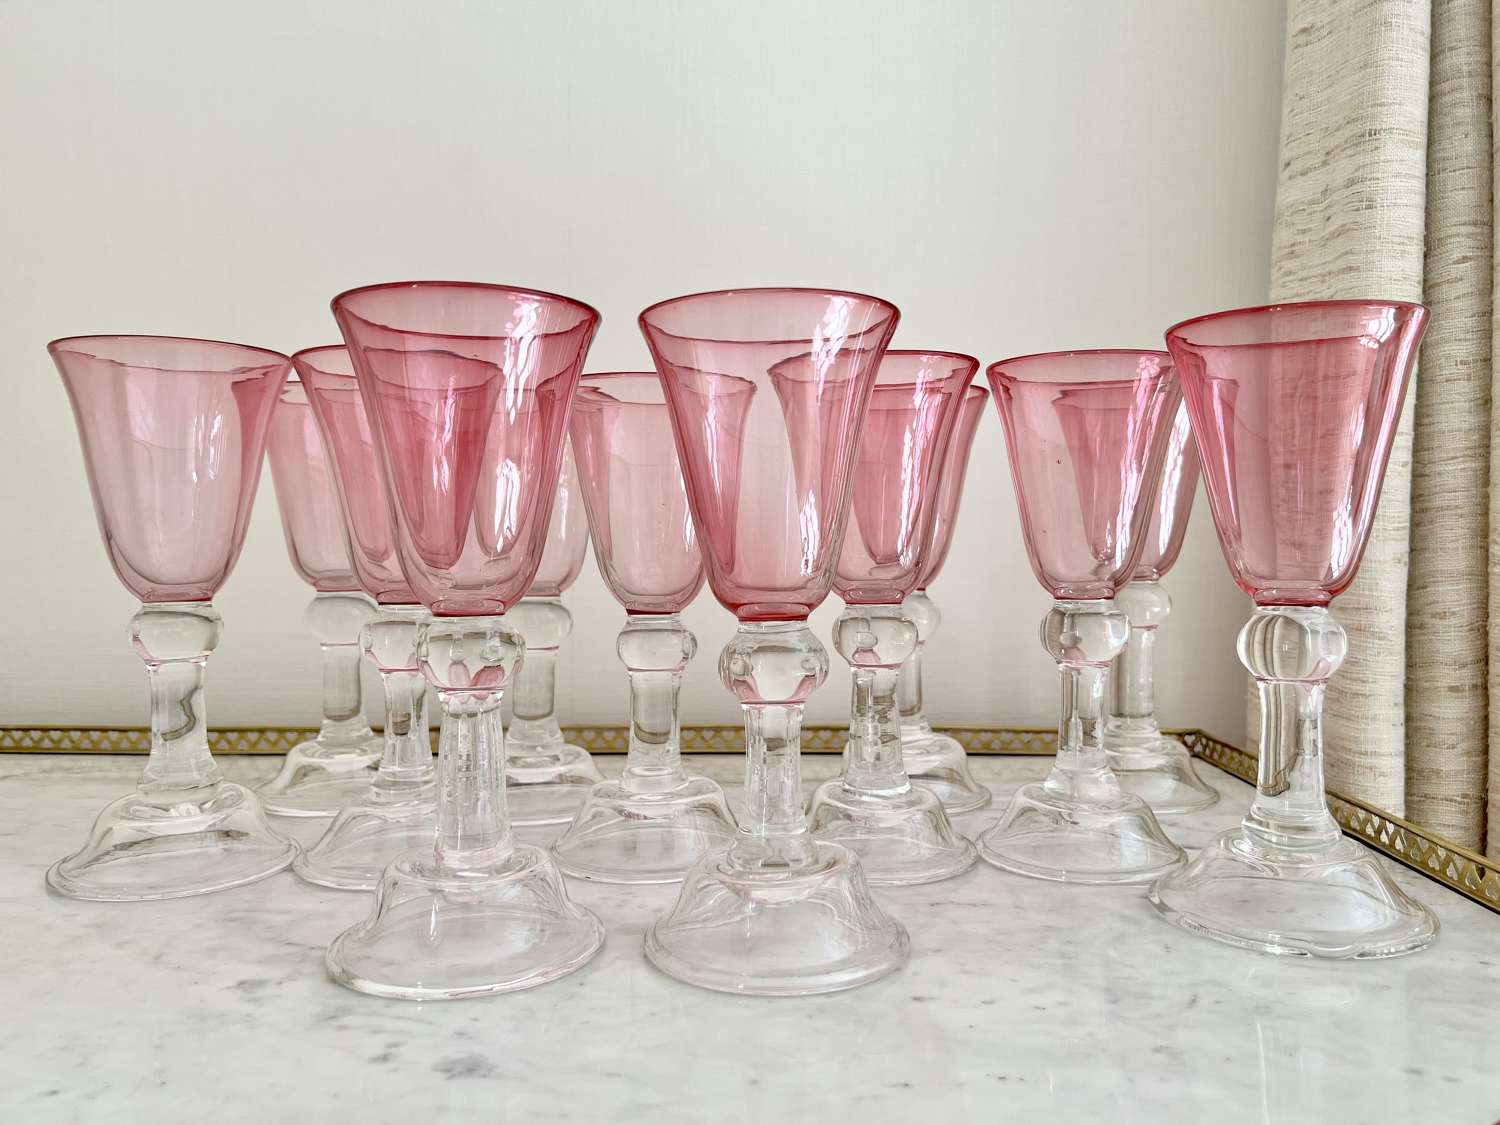 Giant Anthony Stern handblown giant crystal wine goblets